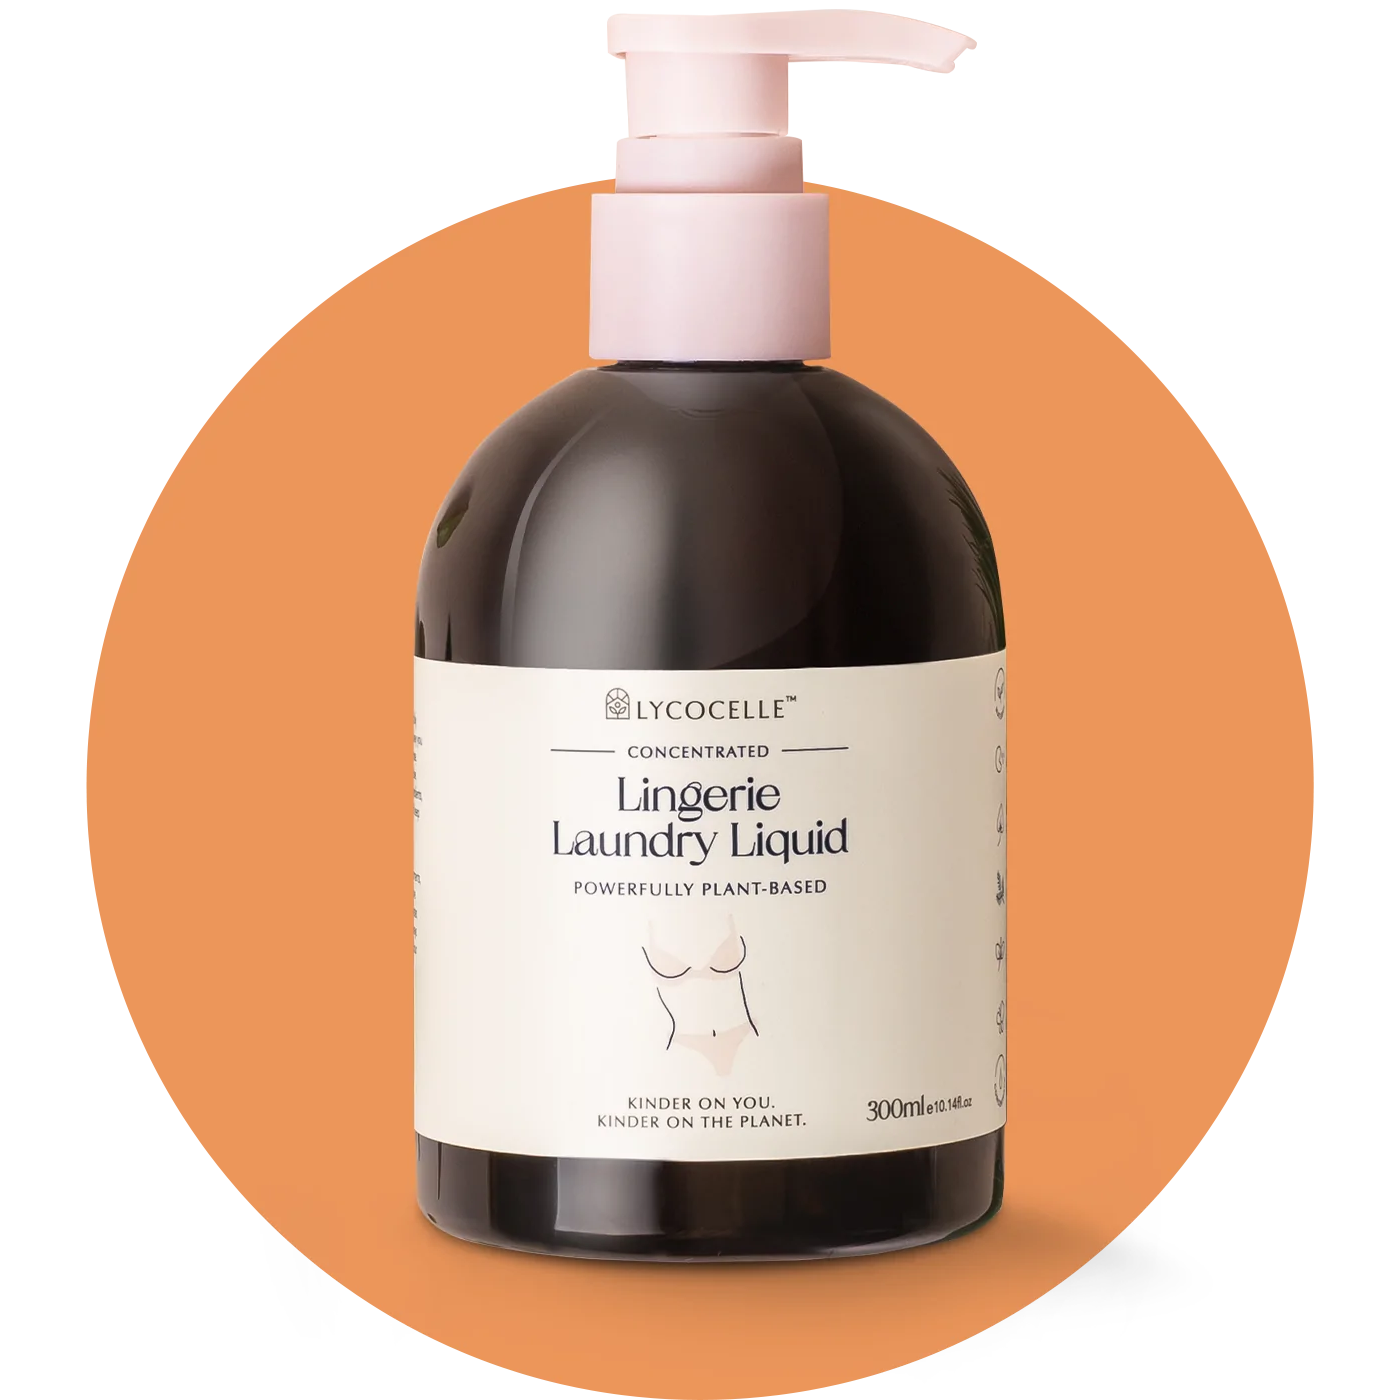 Lycocelle Concentrated Lingerie Laundry Liquid 300ml.